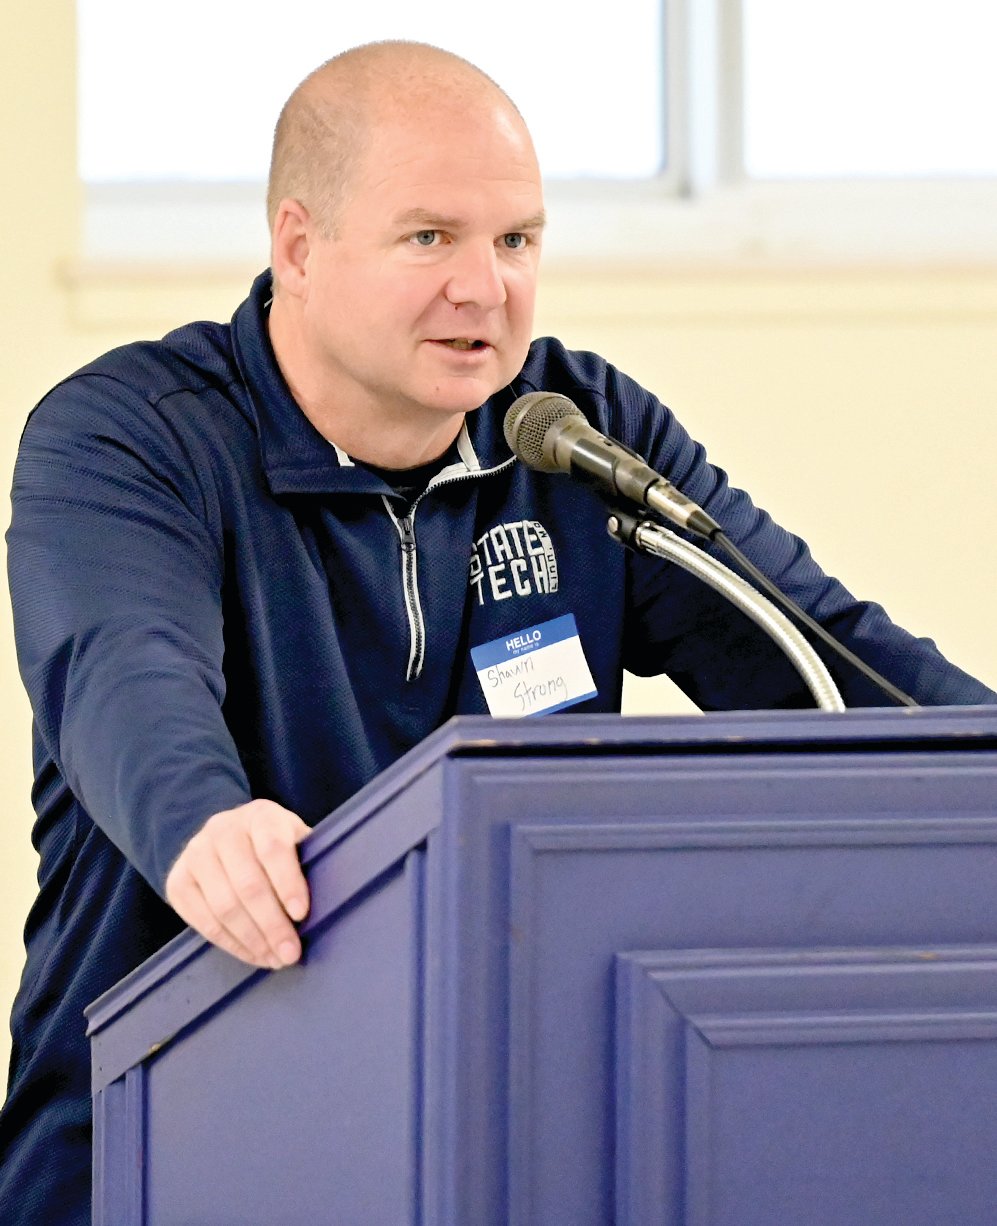 State Tech President Dr. Shawn Strong on Thursday touted the school’s impressive growth amid declining enrollment at both two- and four-year institutions.